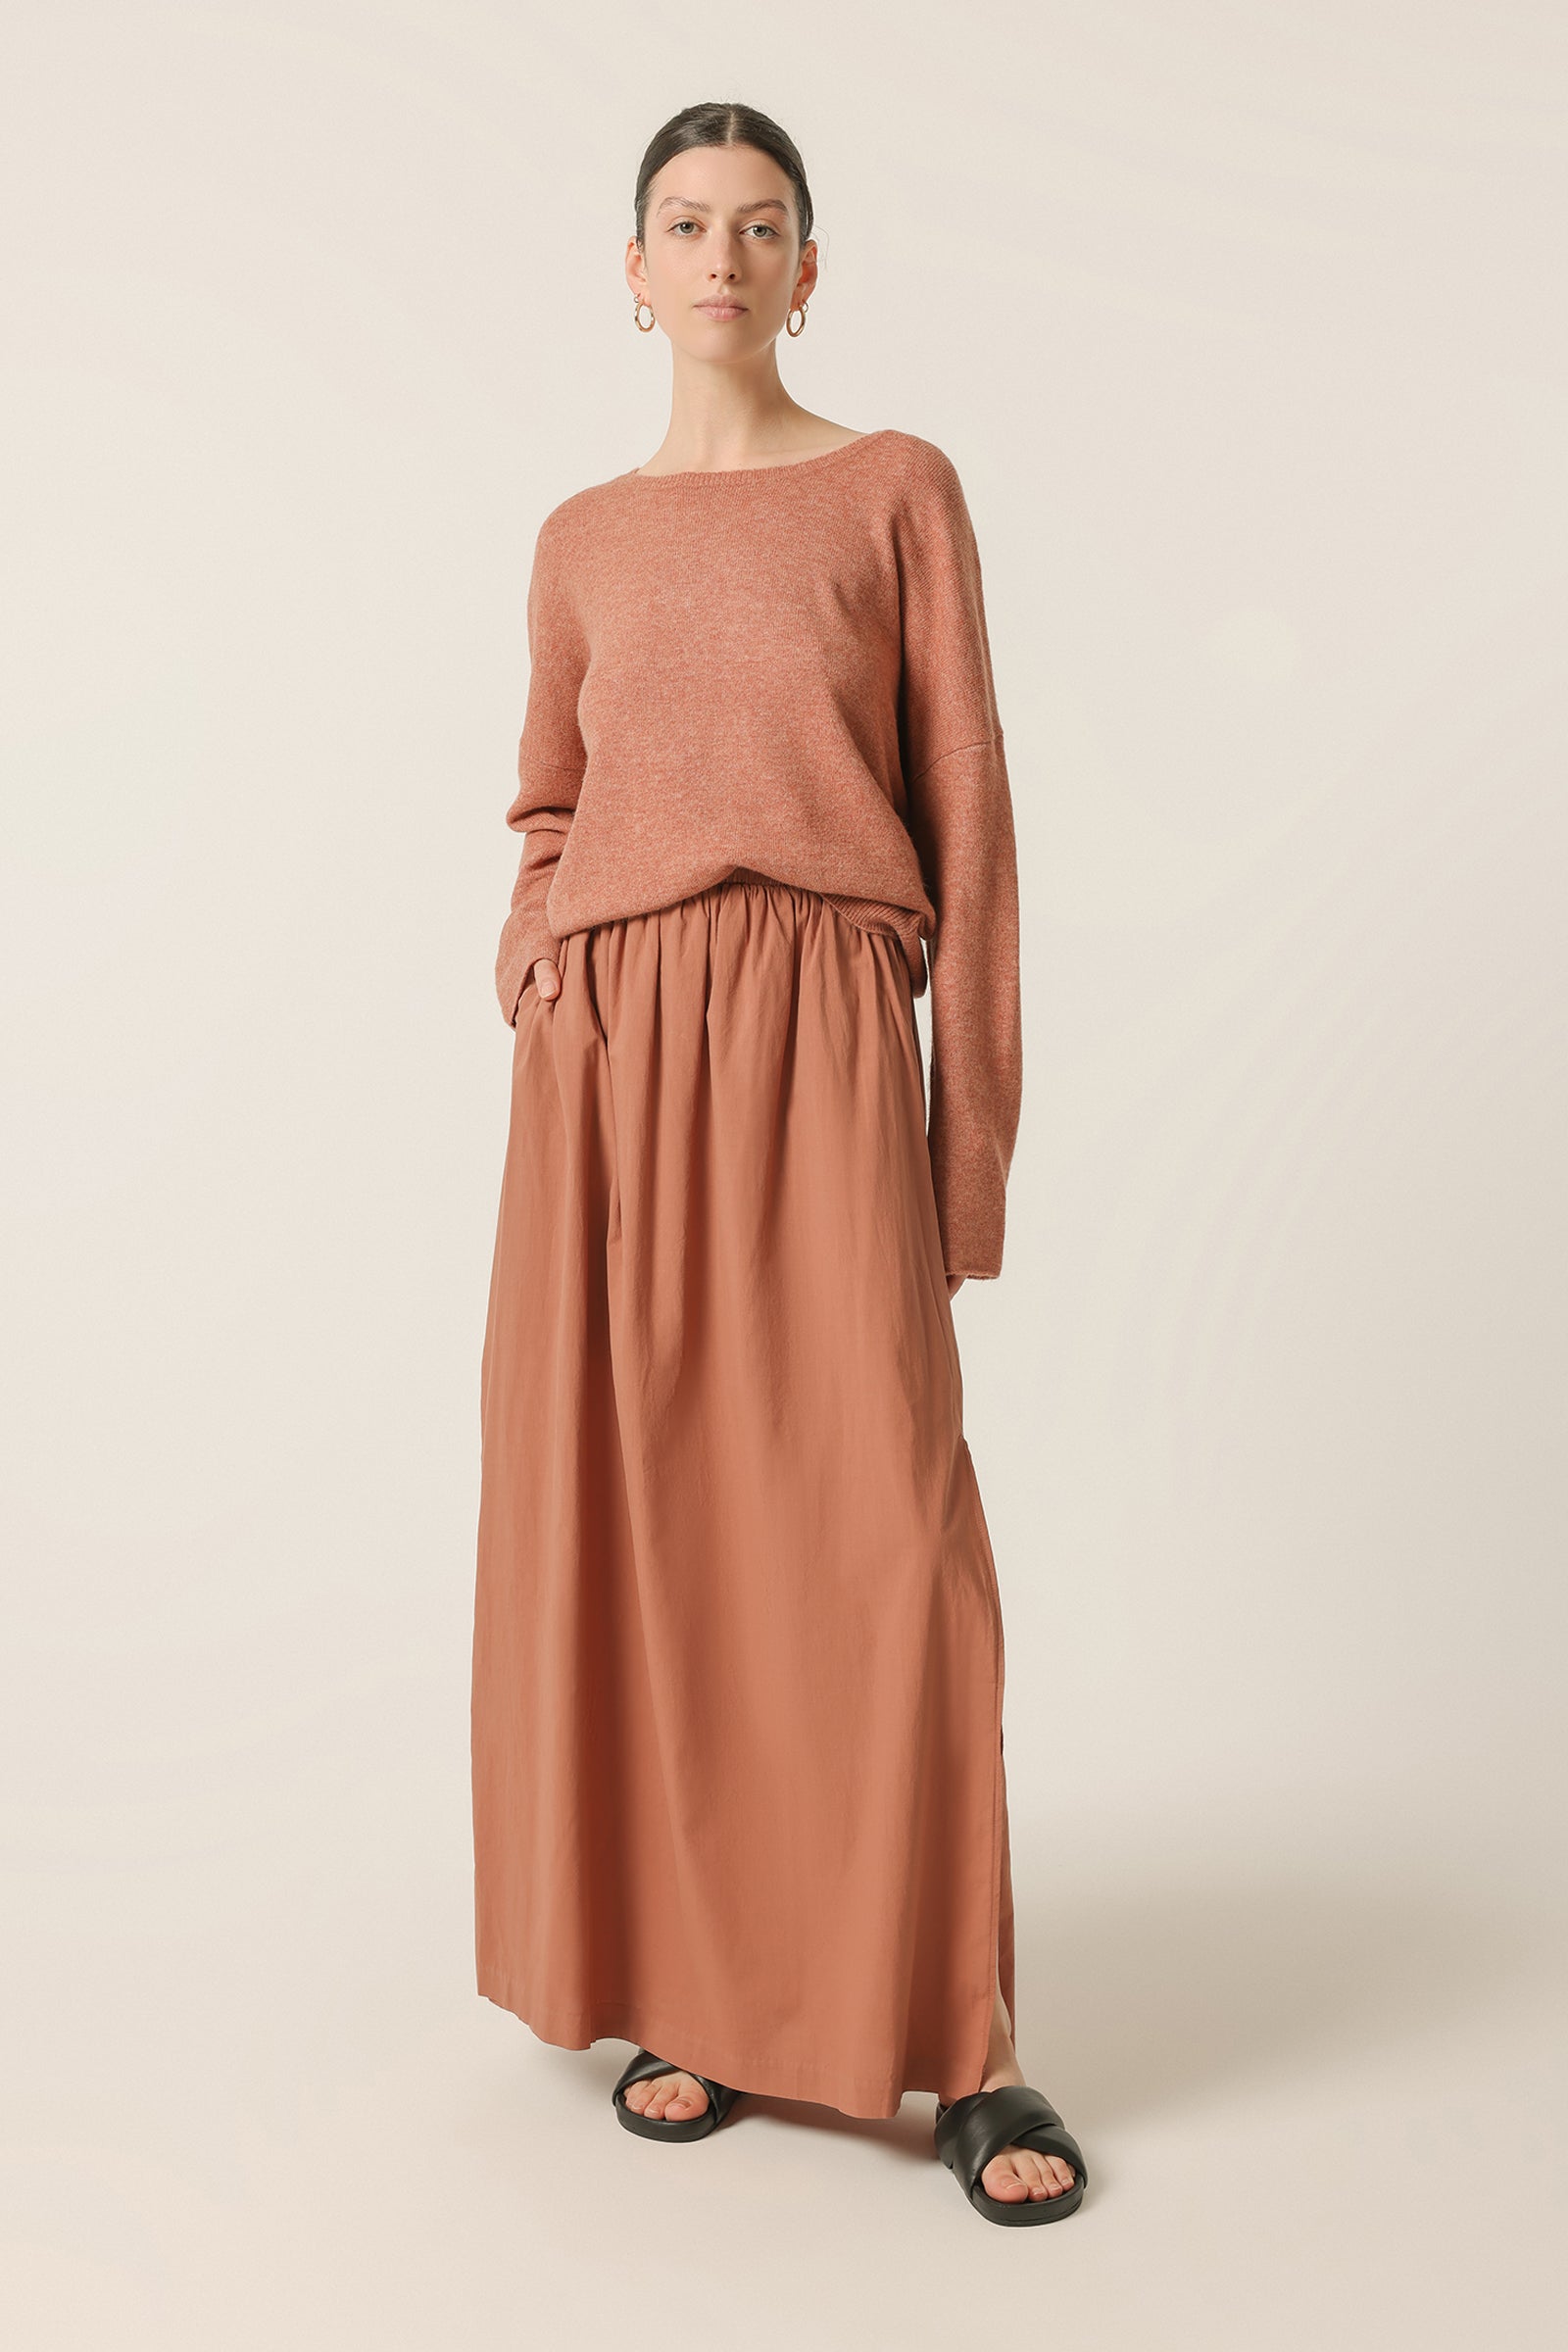 Nude Lucy Hudson Maxi Skirt in a Light Brown Brandy Colour